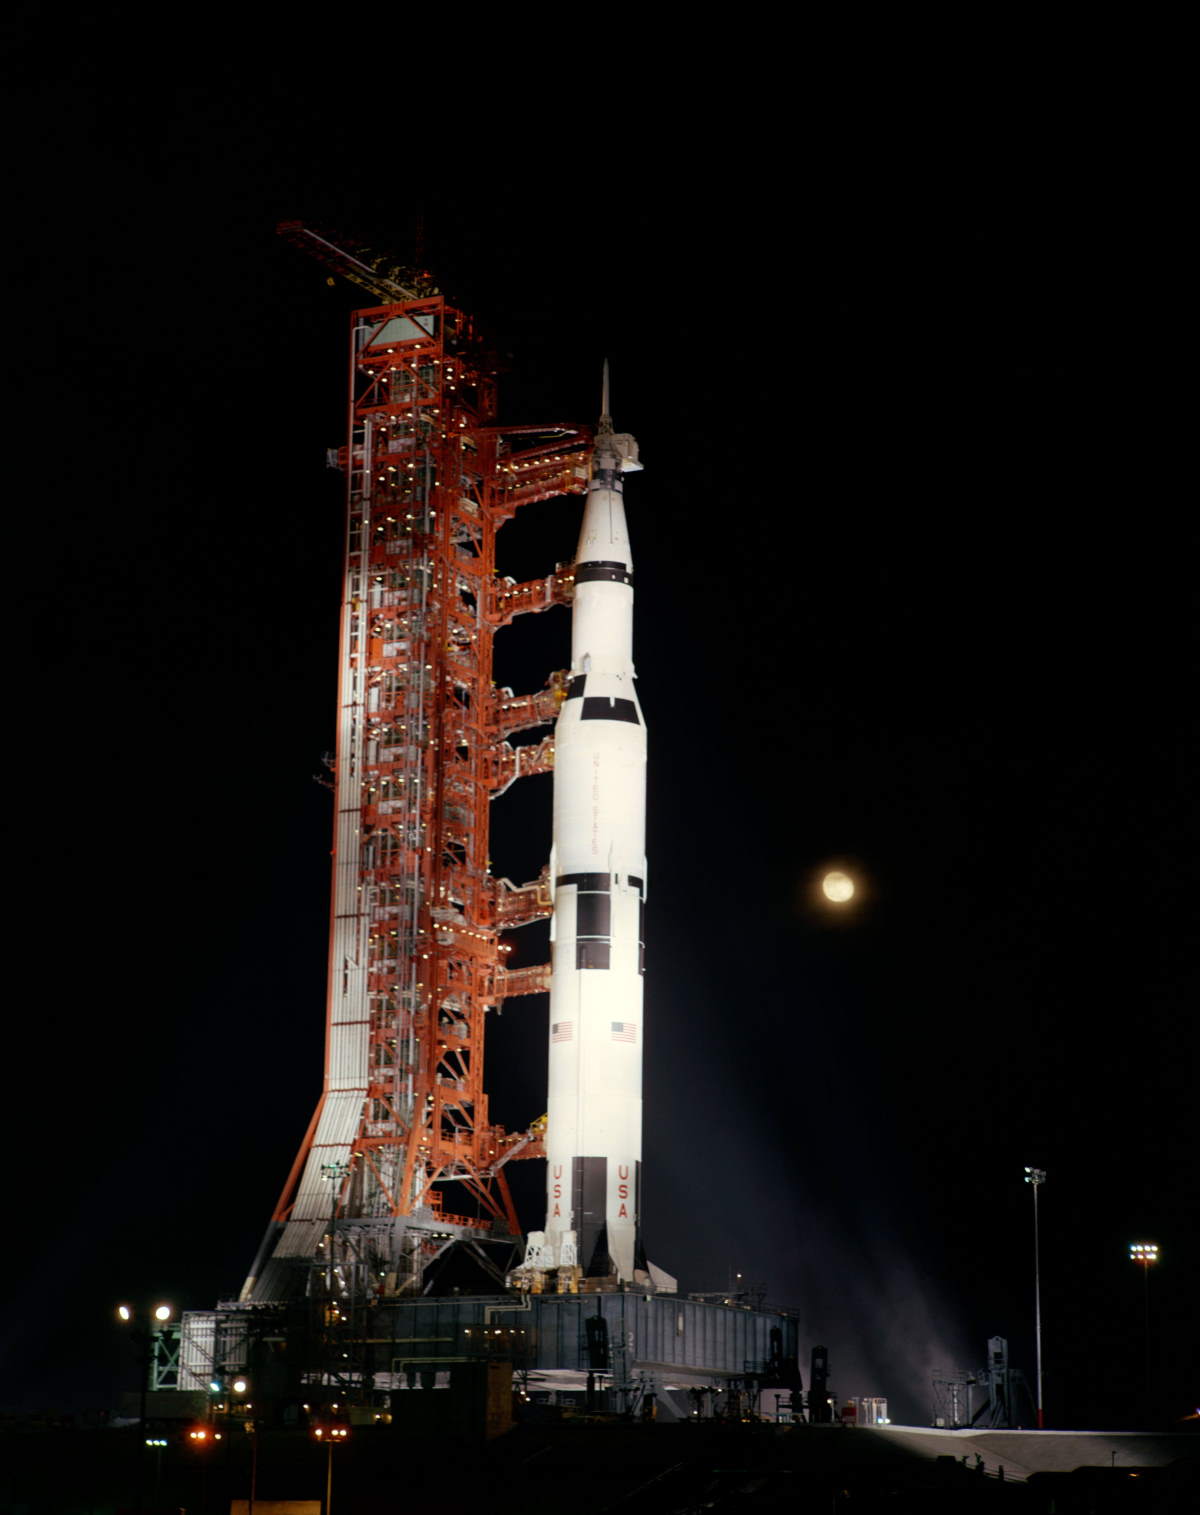 Apollo 12 at the launchpad 39A